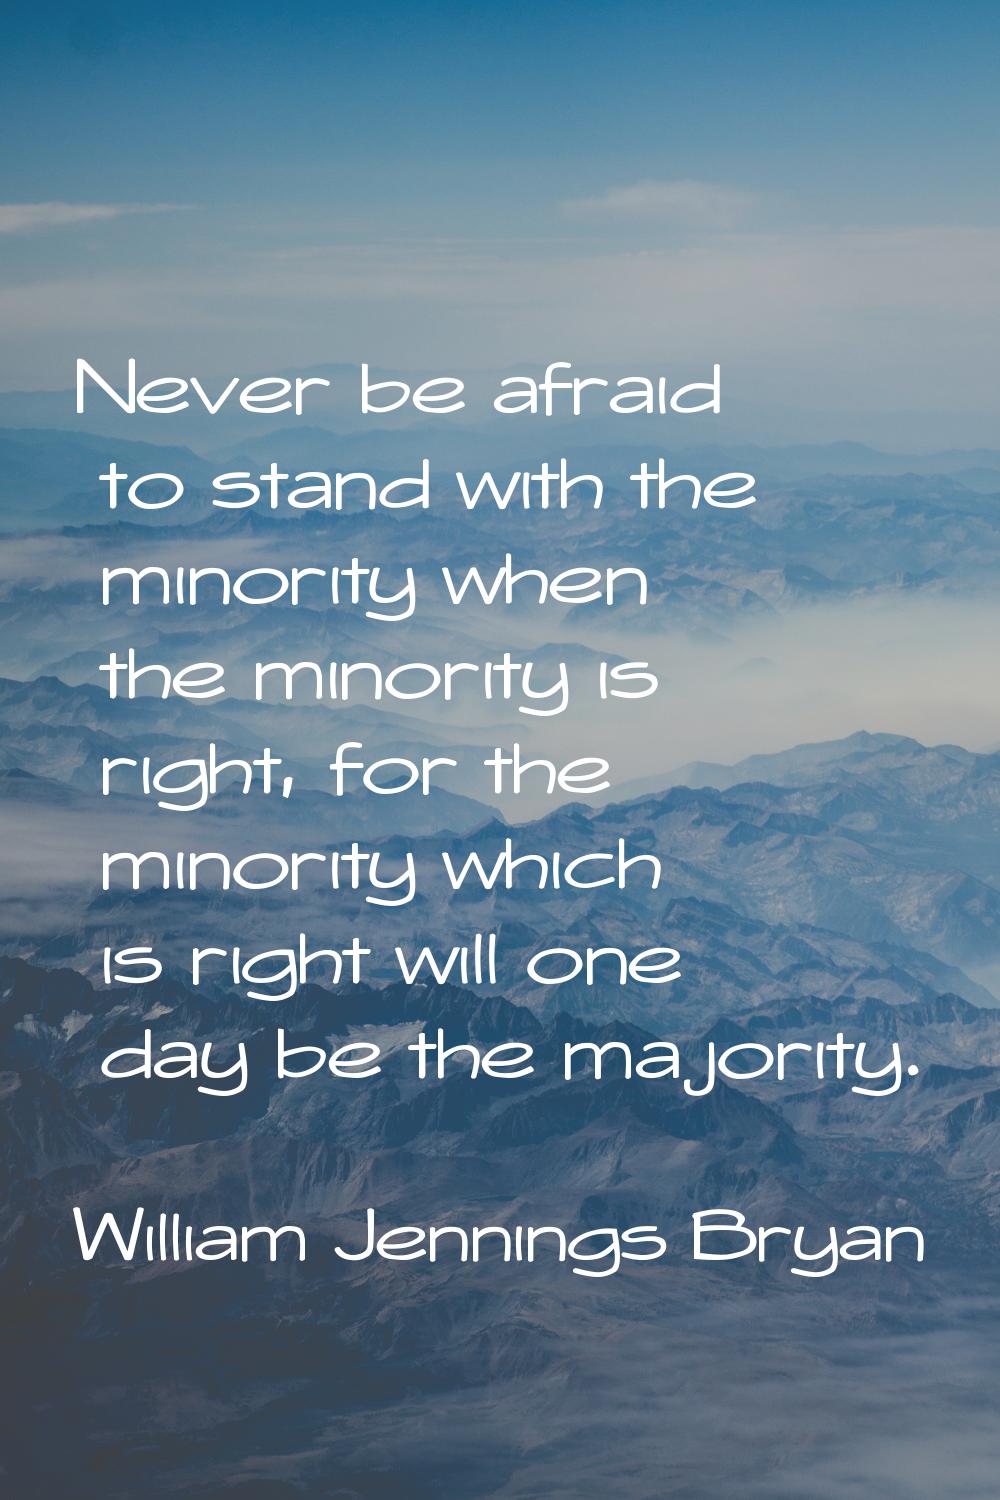 Never be afraid to stand with the minority when the minority is right, for the minority which is ri